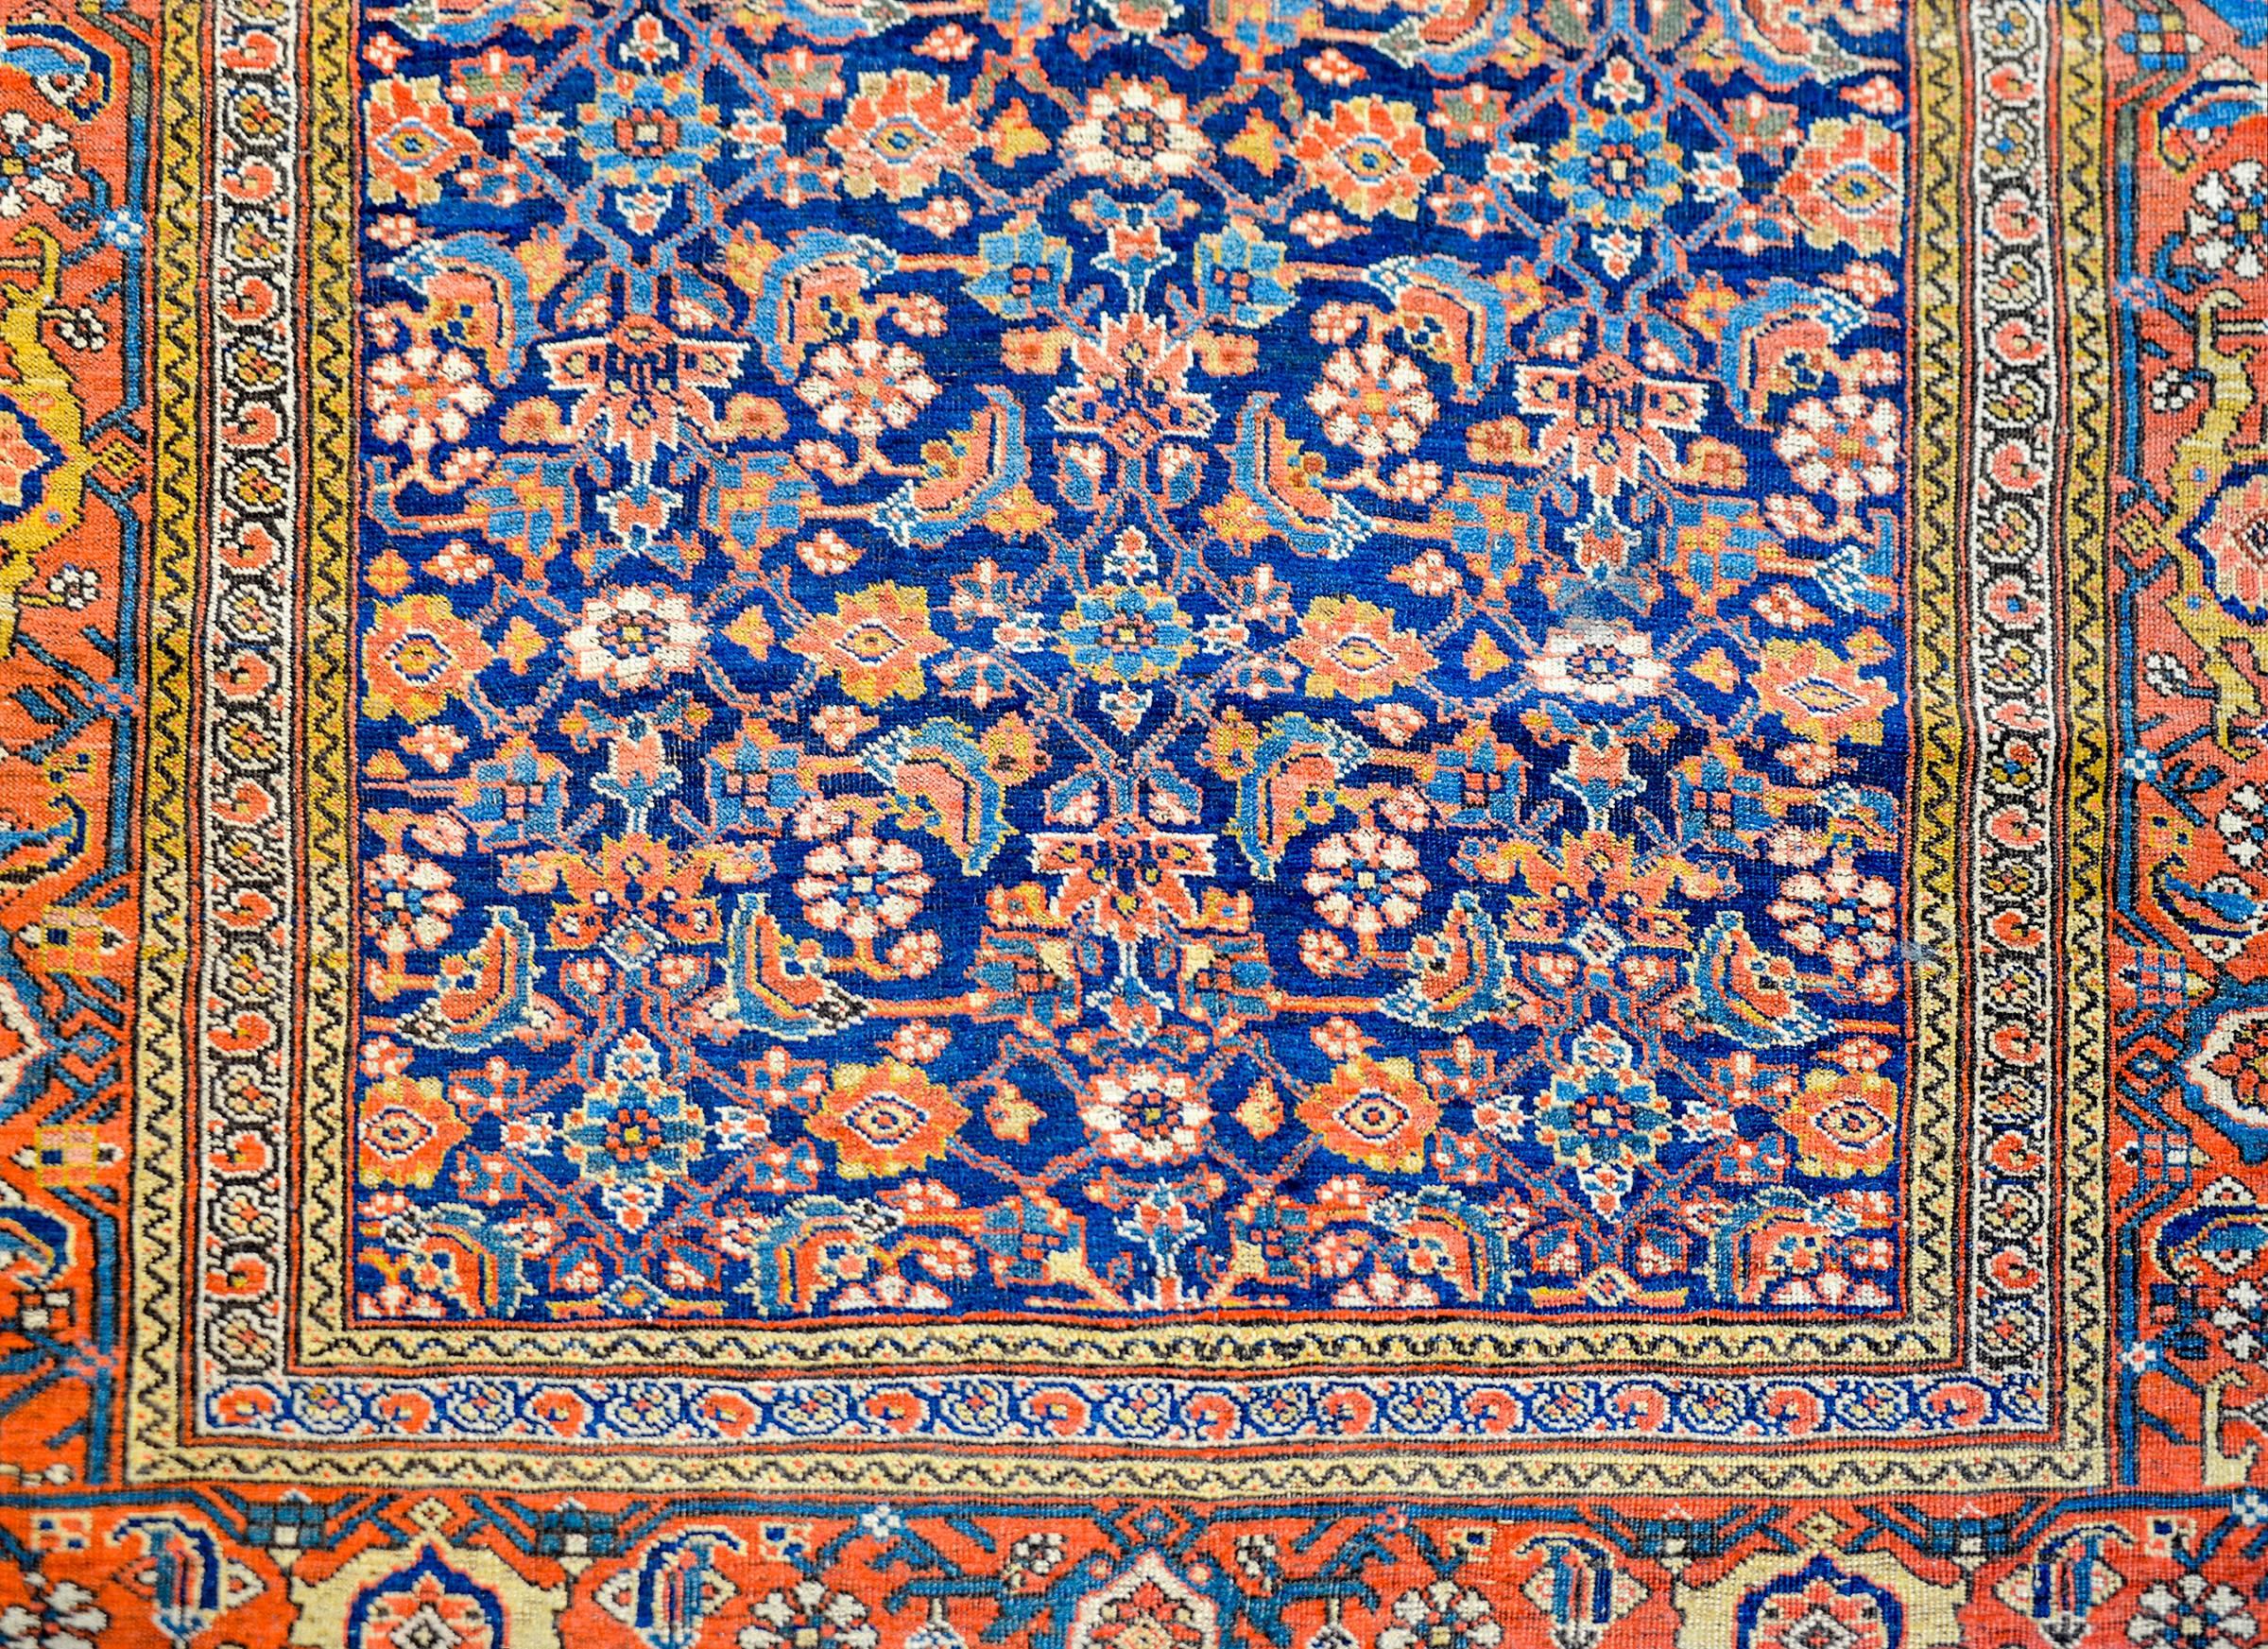 An exceptional late 19th century Persian Bidjar rug with a fantastic central field composed with a floral and vine trellis pattern rendered in brilliant crimson, gold, light indigo and cream colored vegetable dyed wool, on a bold dark indigo